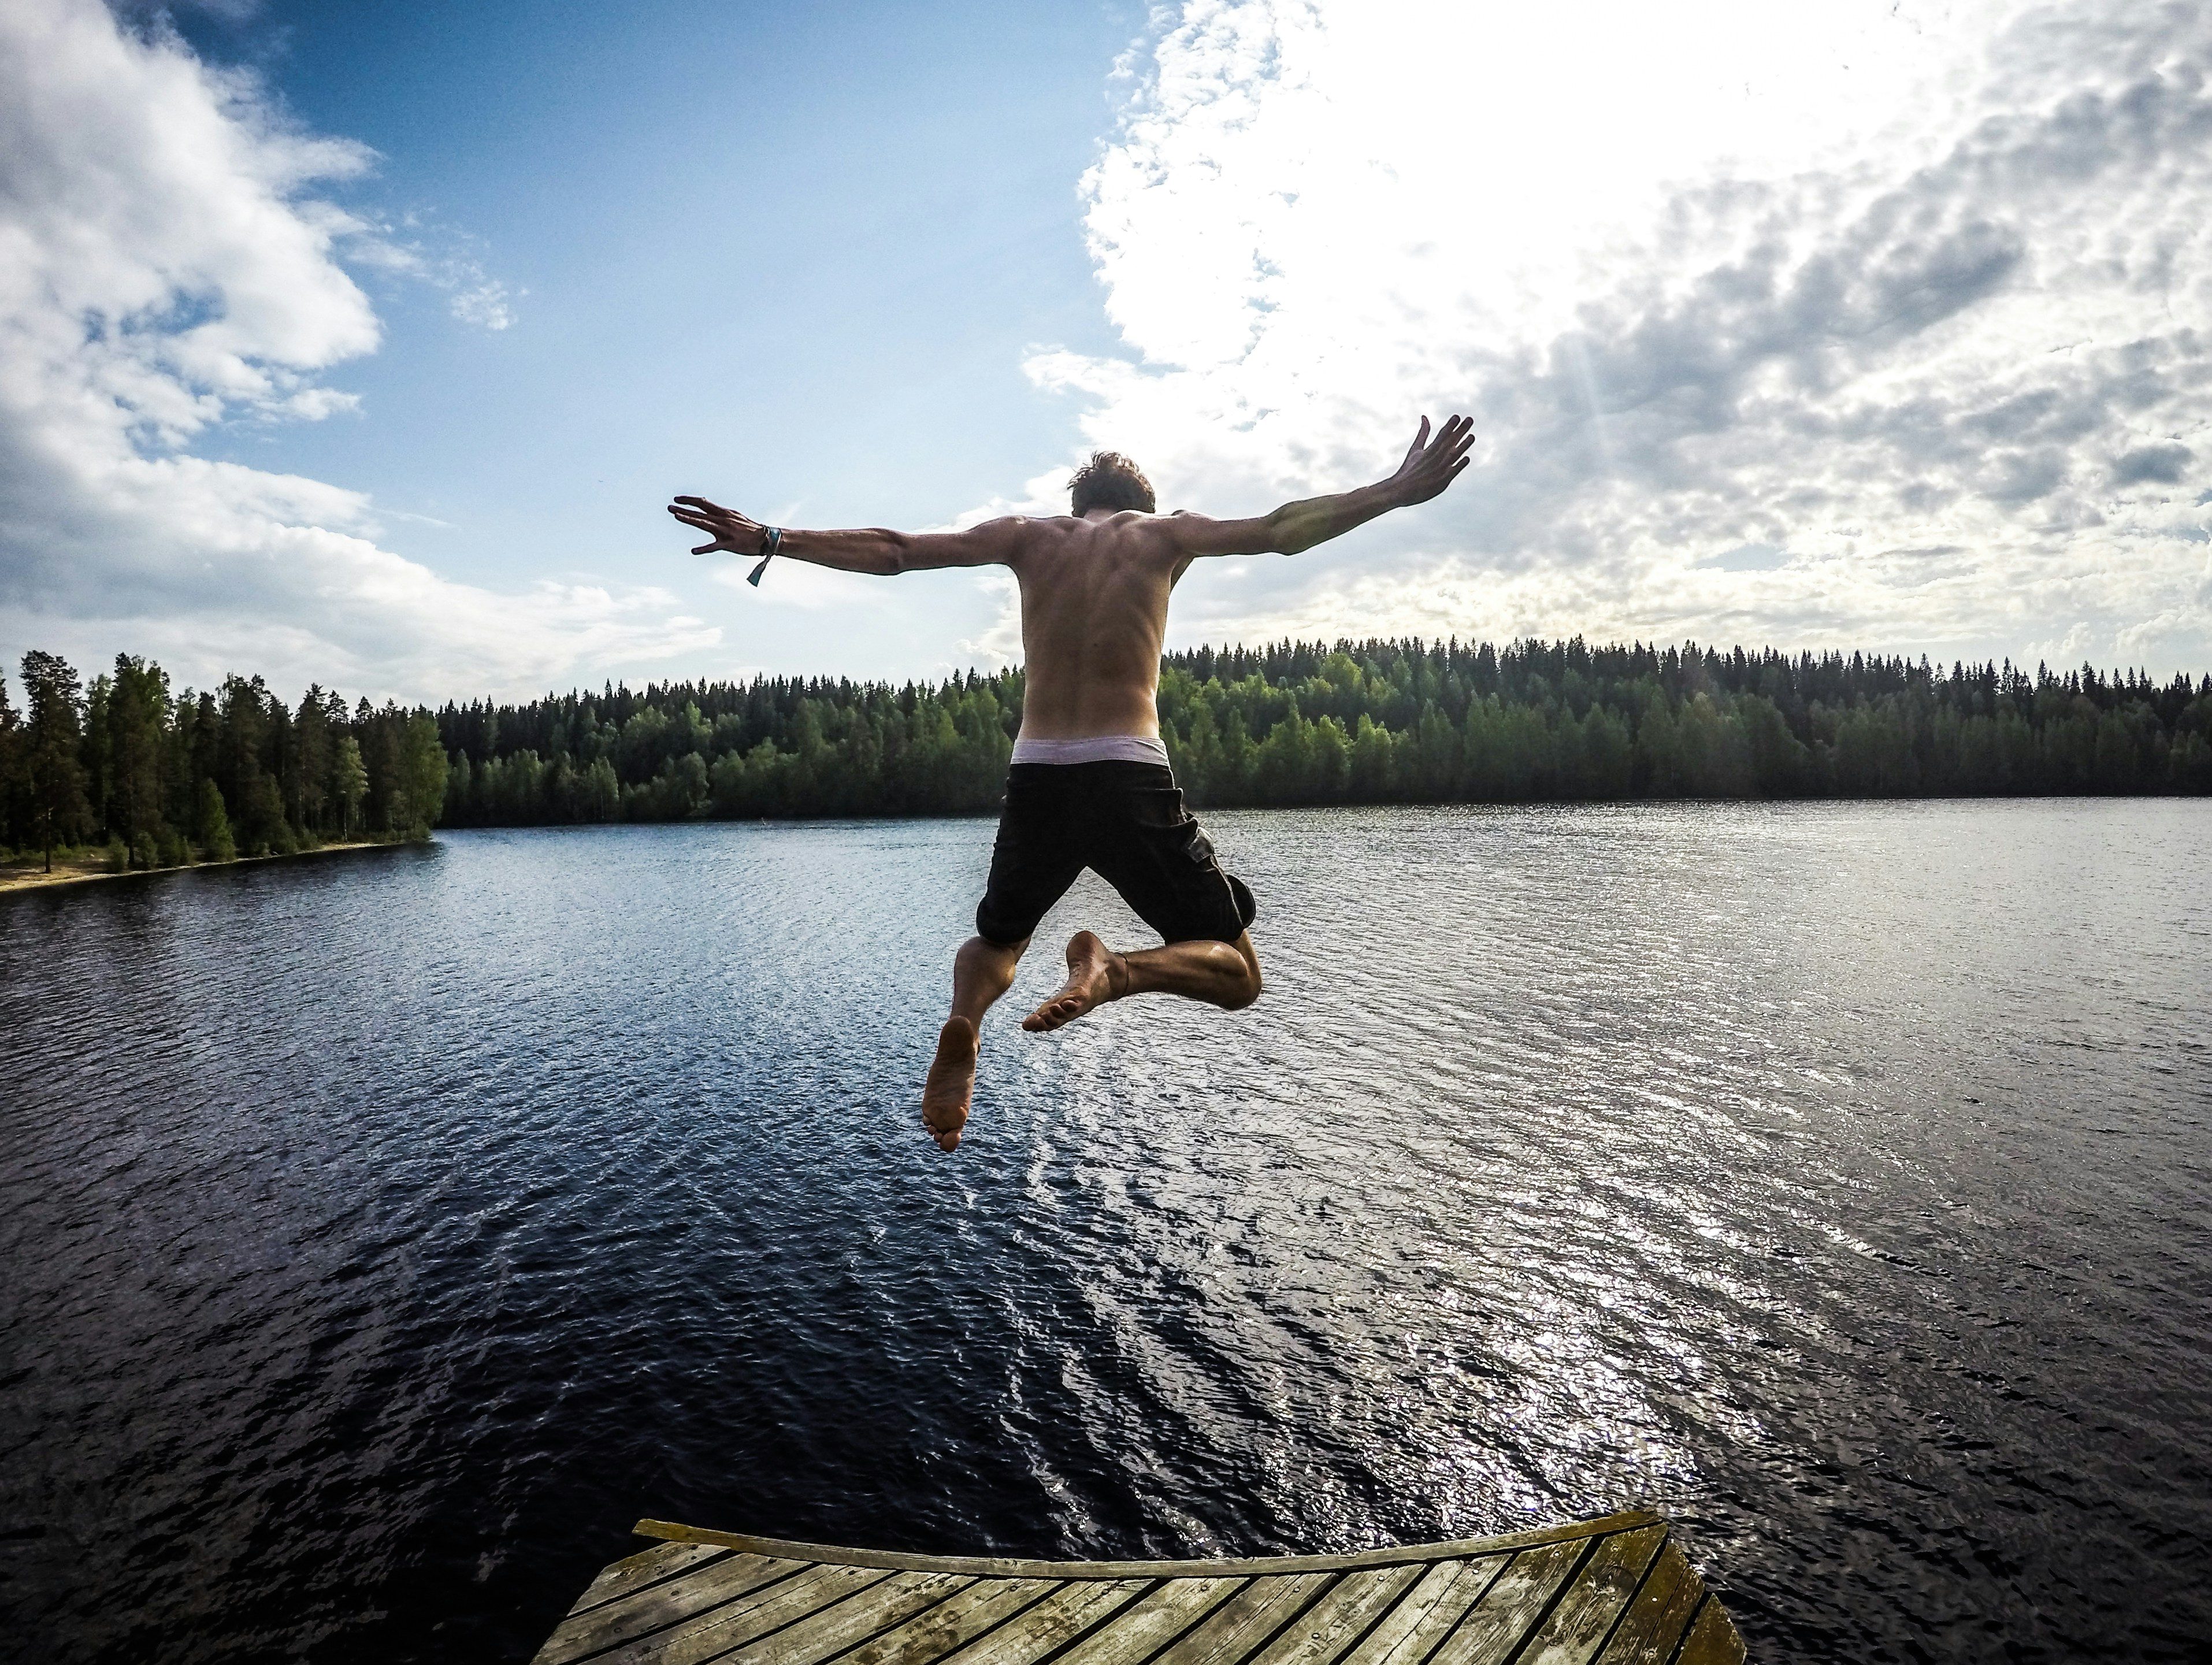 Jumped in May in Finland, during Erasmus exchange project.